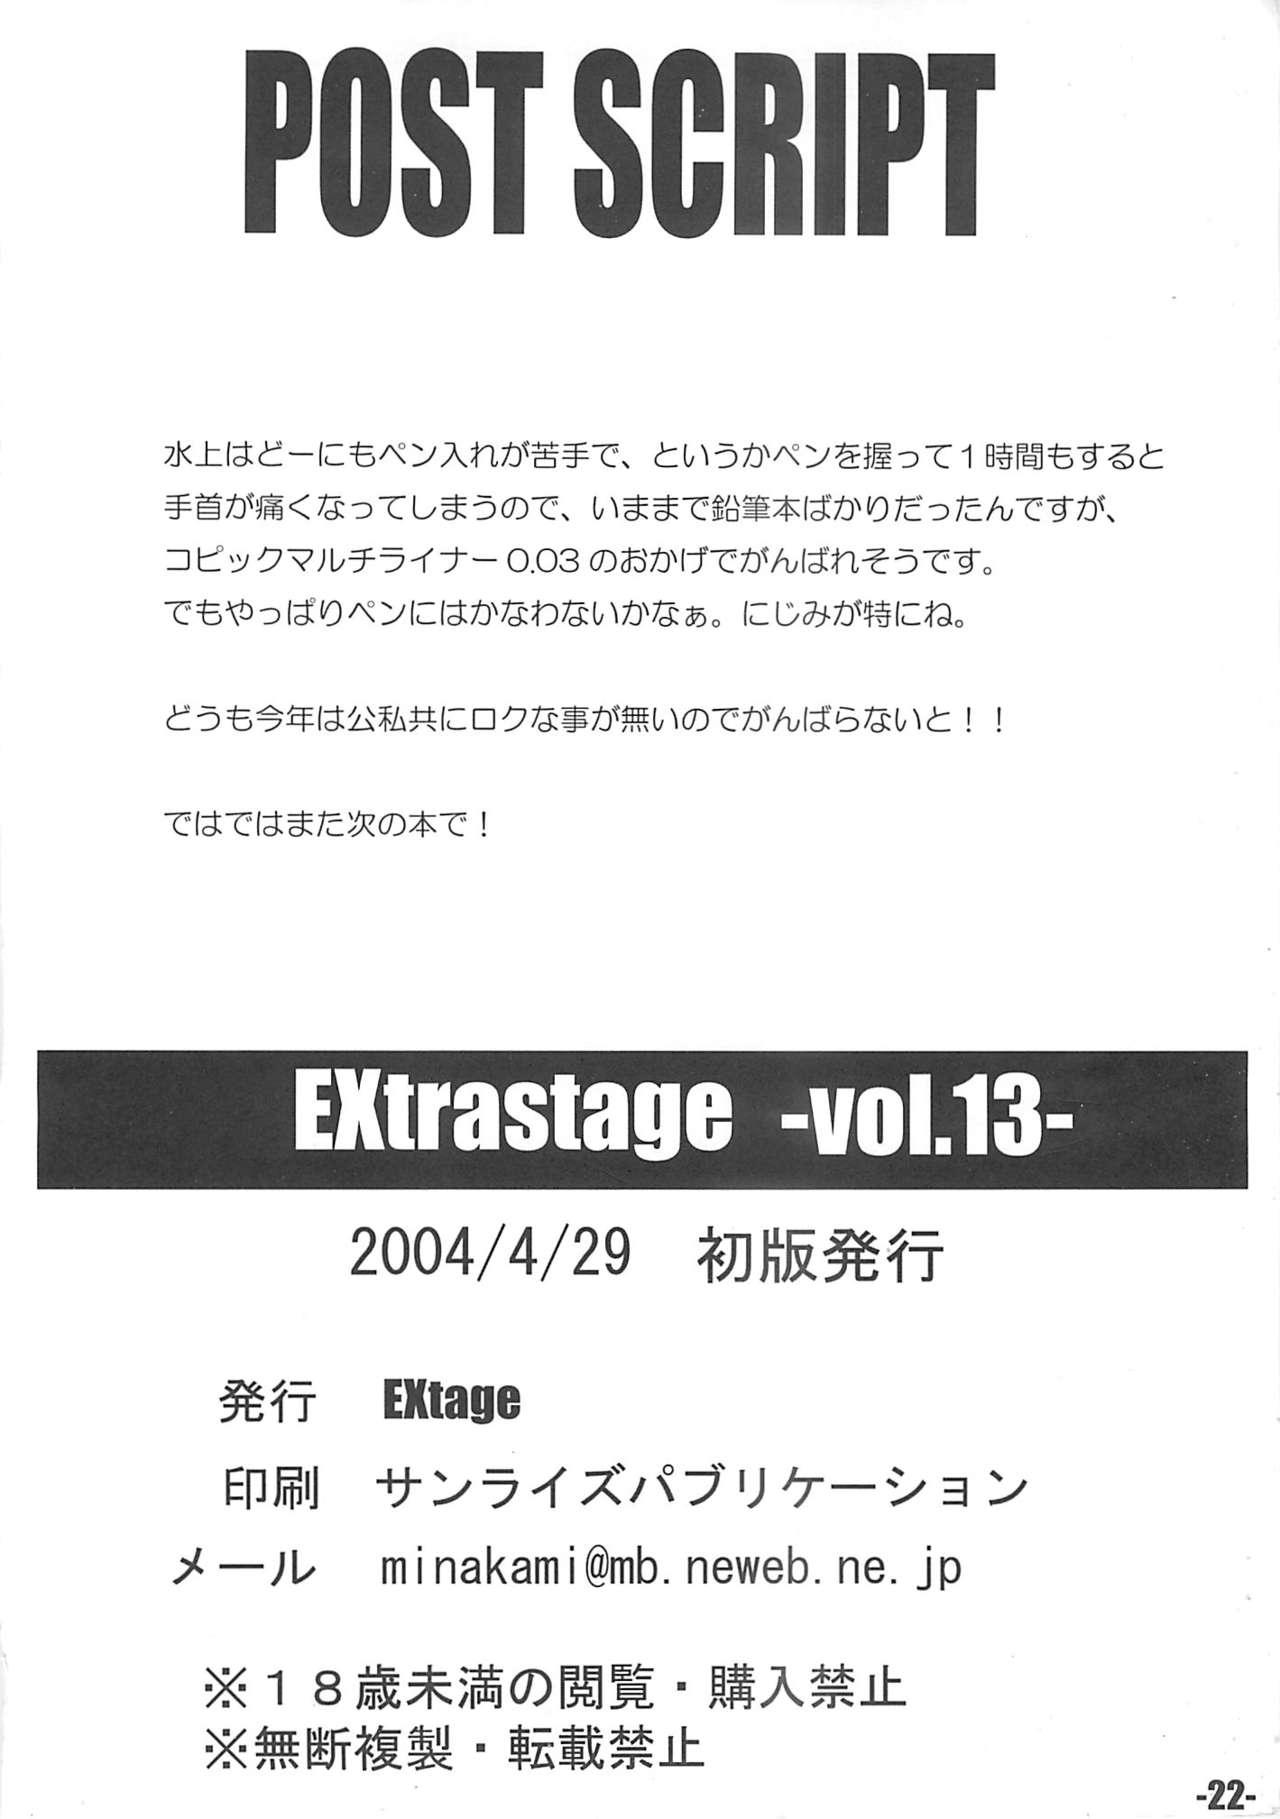 EXtra stage vol. 13 20